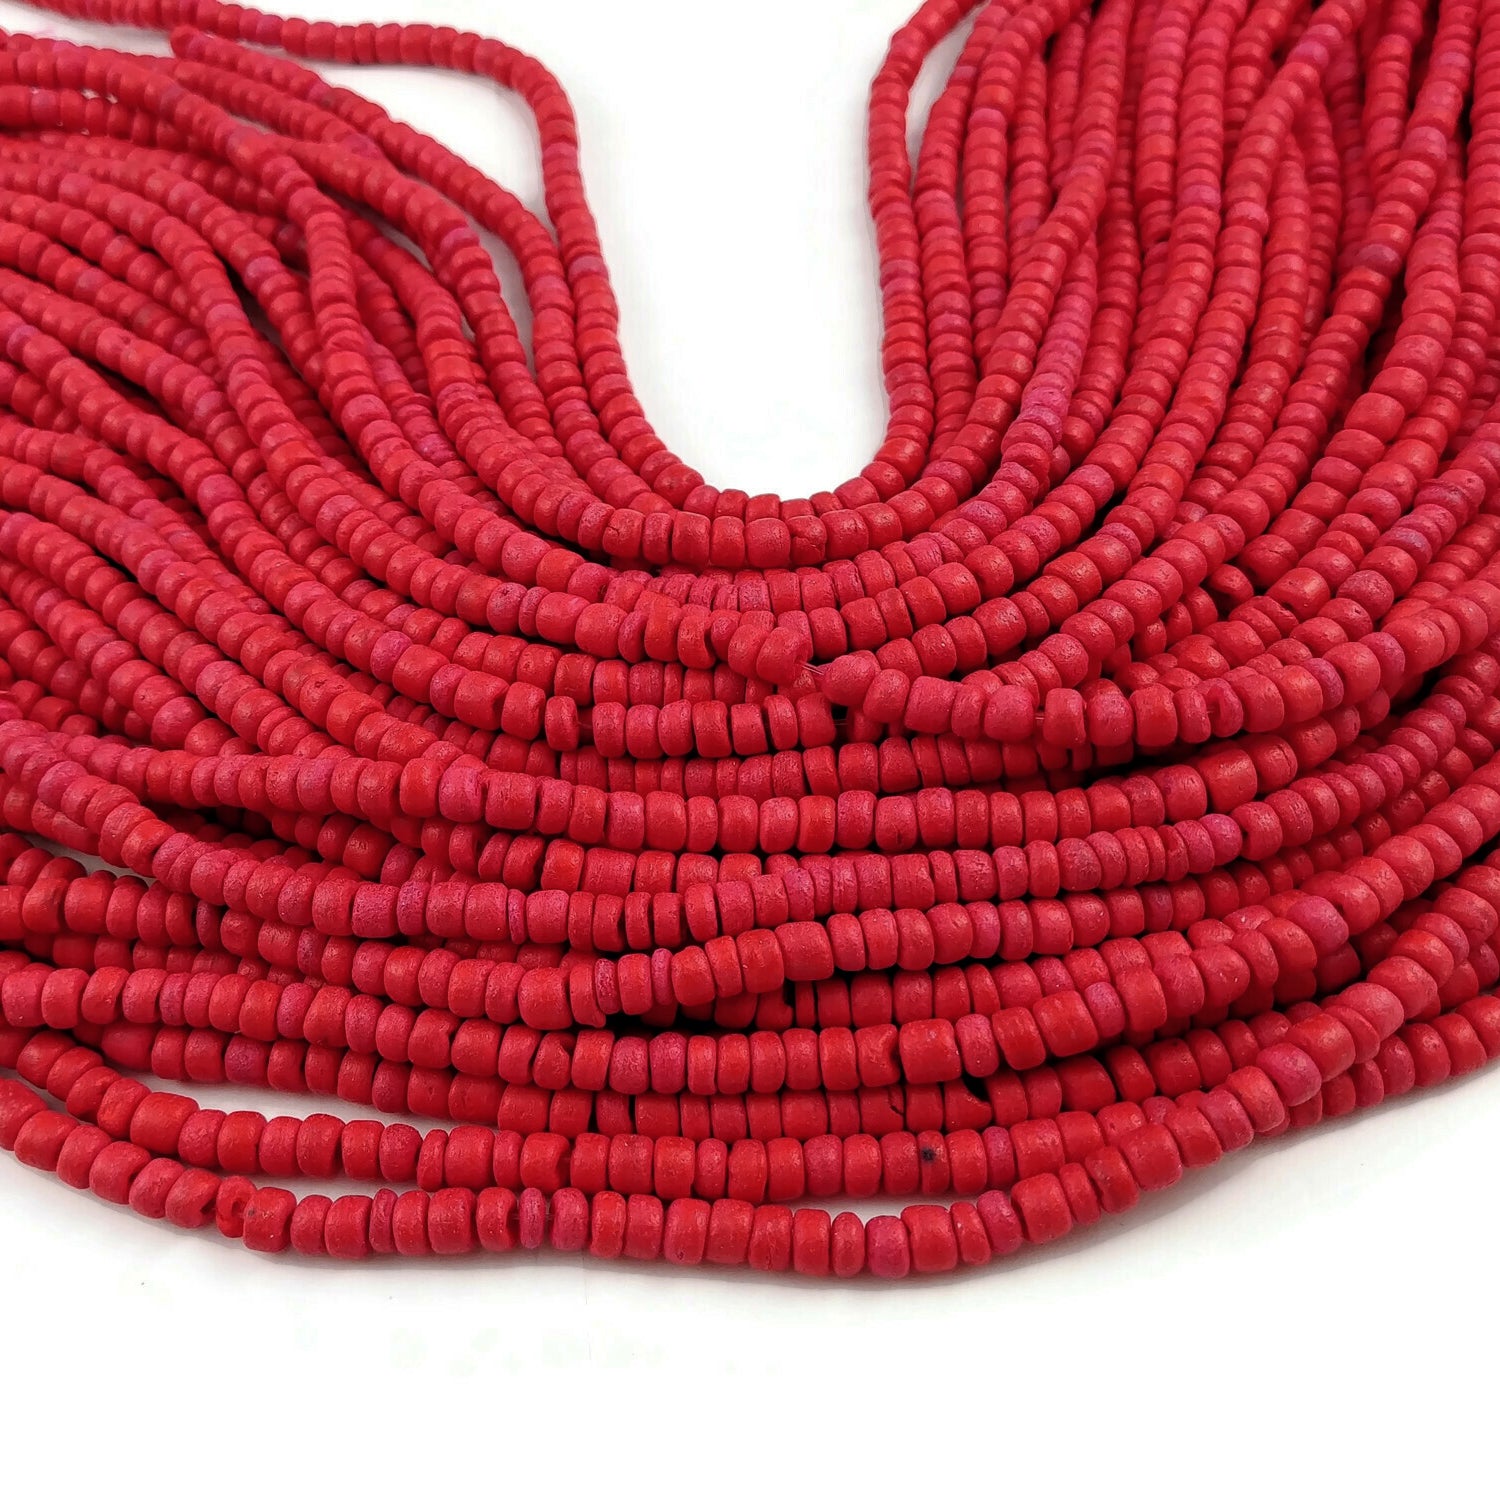 Red coconut beads - Wooden rondelle disk beads 5mm